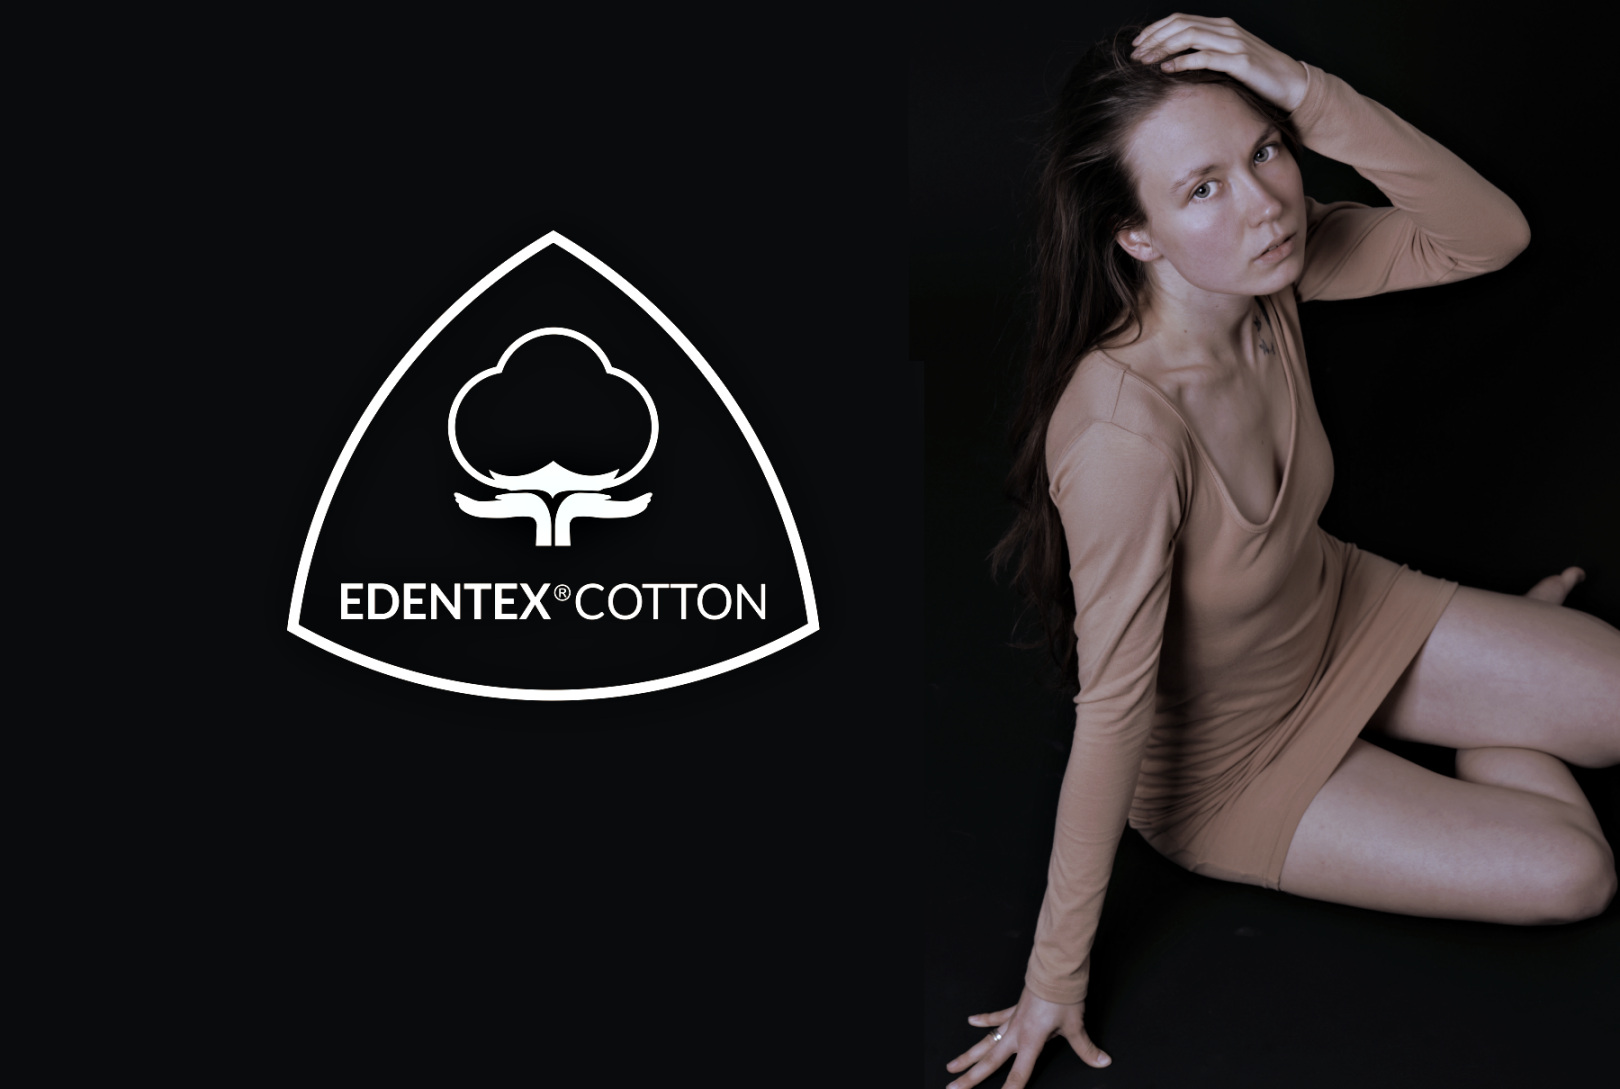 Every innovation and special technology, as EDENTEX®COTTON, EDENTEX BRIGHT COLOUR™ or EDENTEX SOFT FINISHING™ are used in production of all EDENTEX® cotton fabrics as a standard